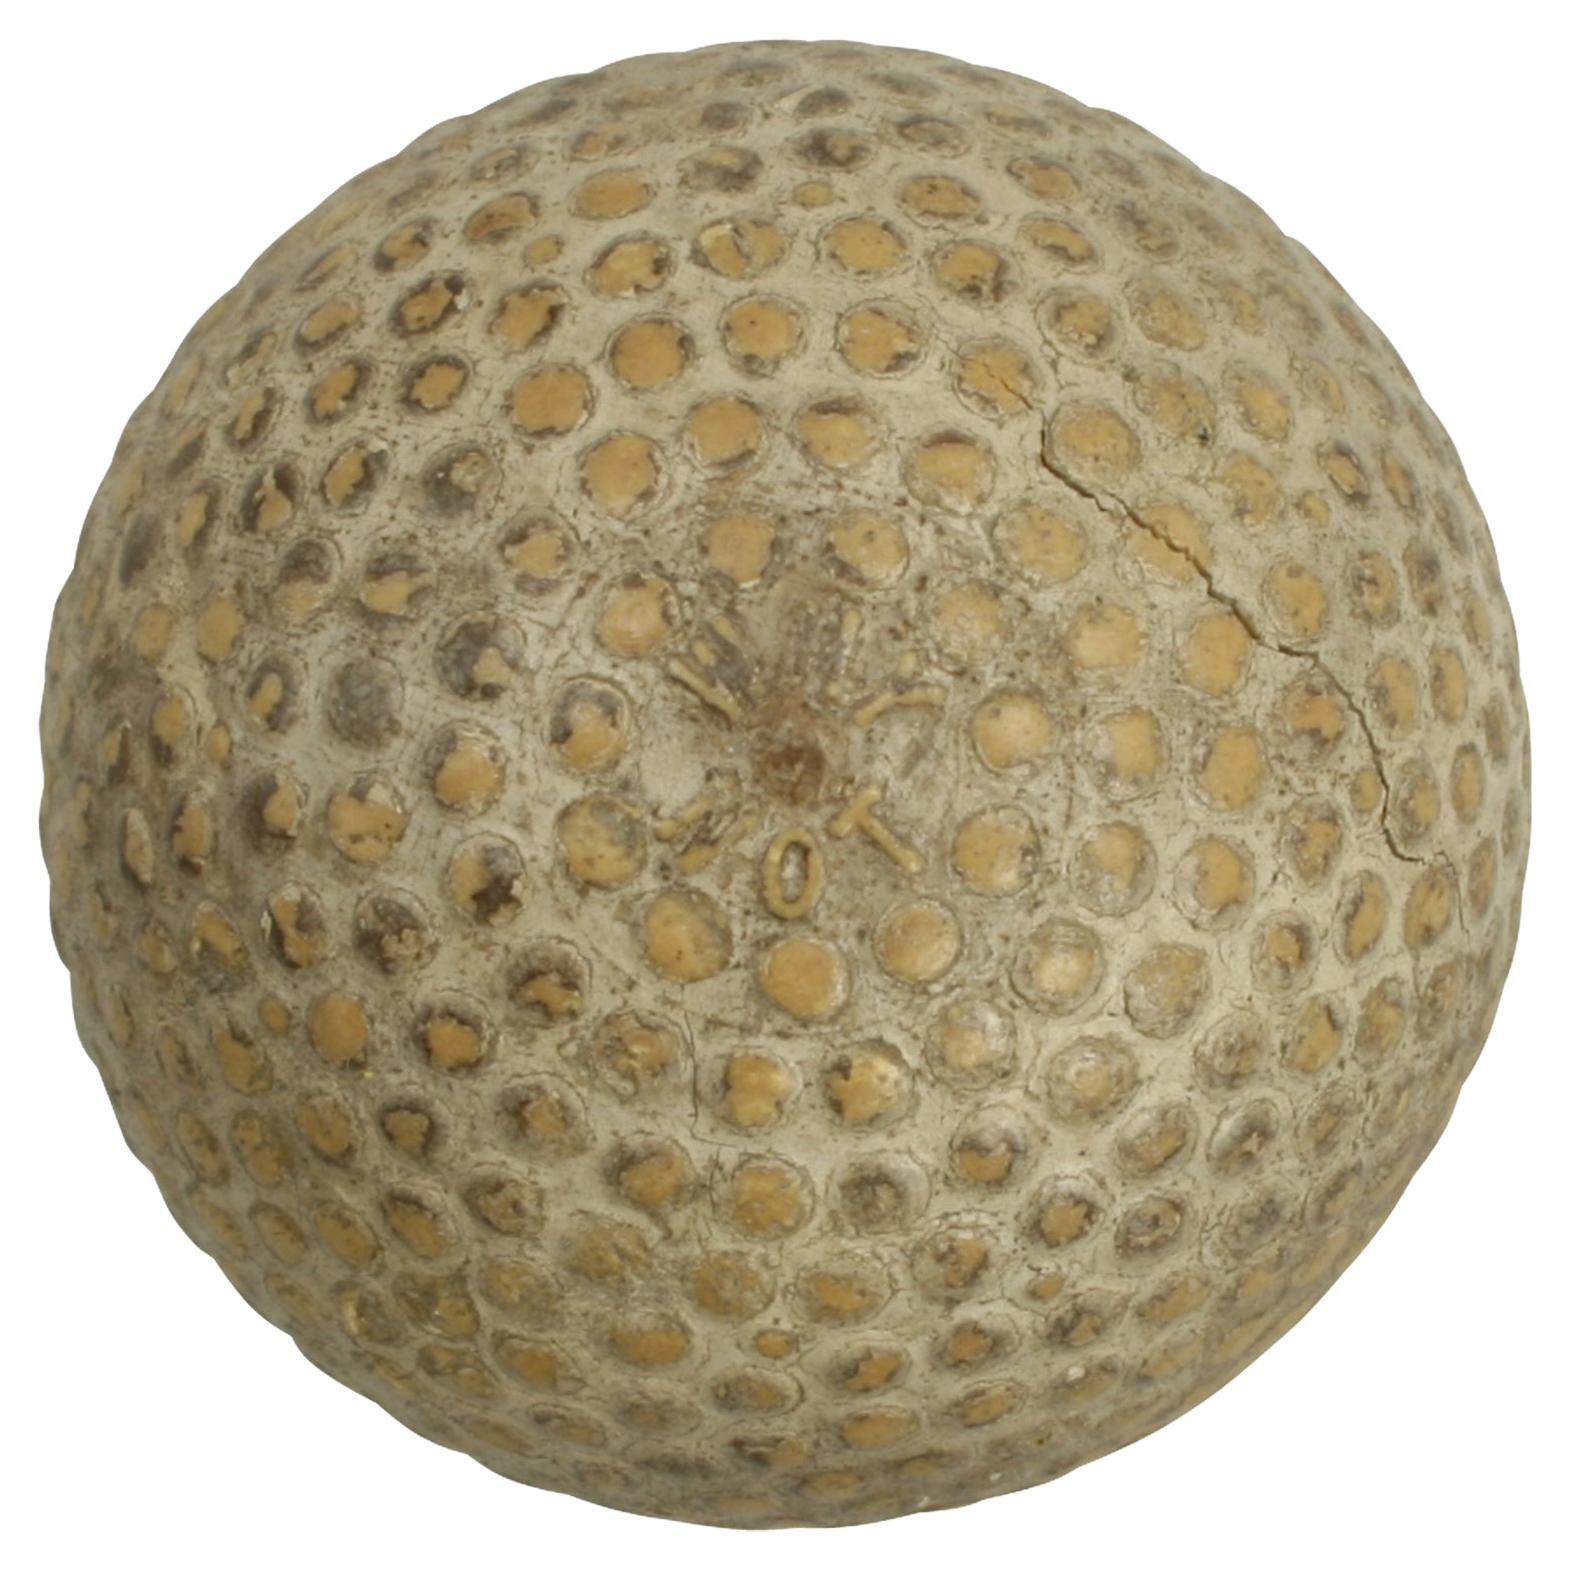 Vintage Golf Ball, the 'Why Not' Bramble Golf Ball.